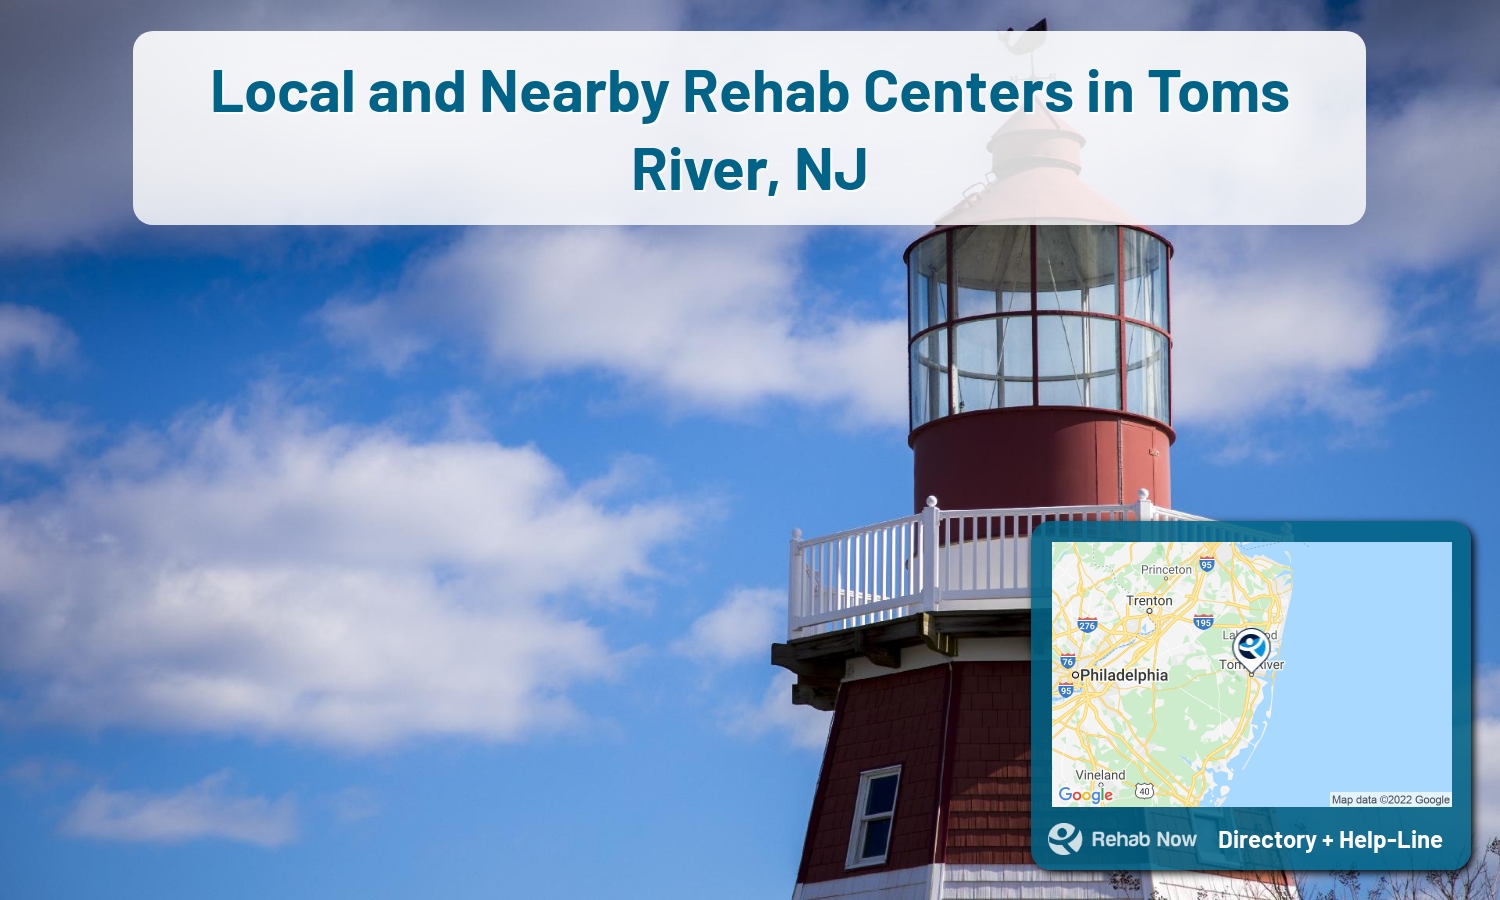 Toms River, NJ Treatment Centers. Find drug rehab in Toms River, New Jersey, or detox and treatment programs. Get the right help now!